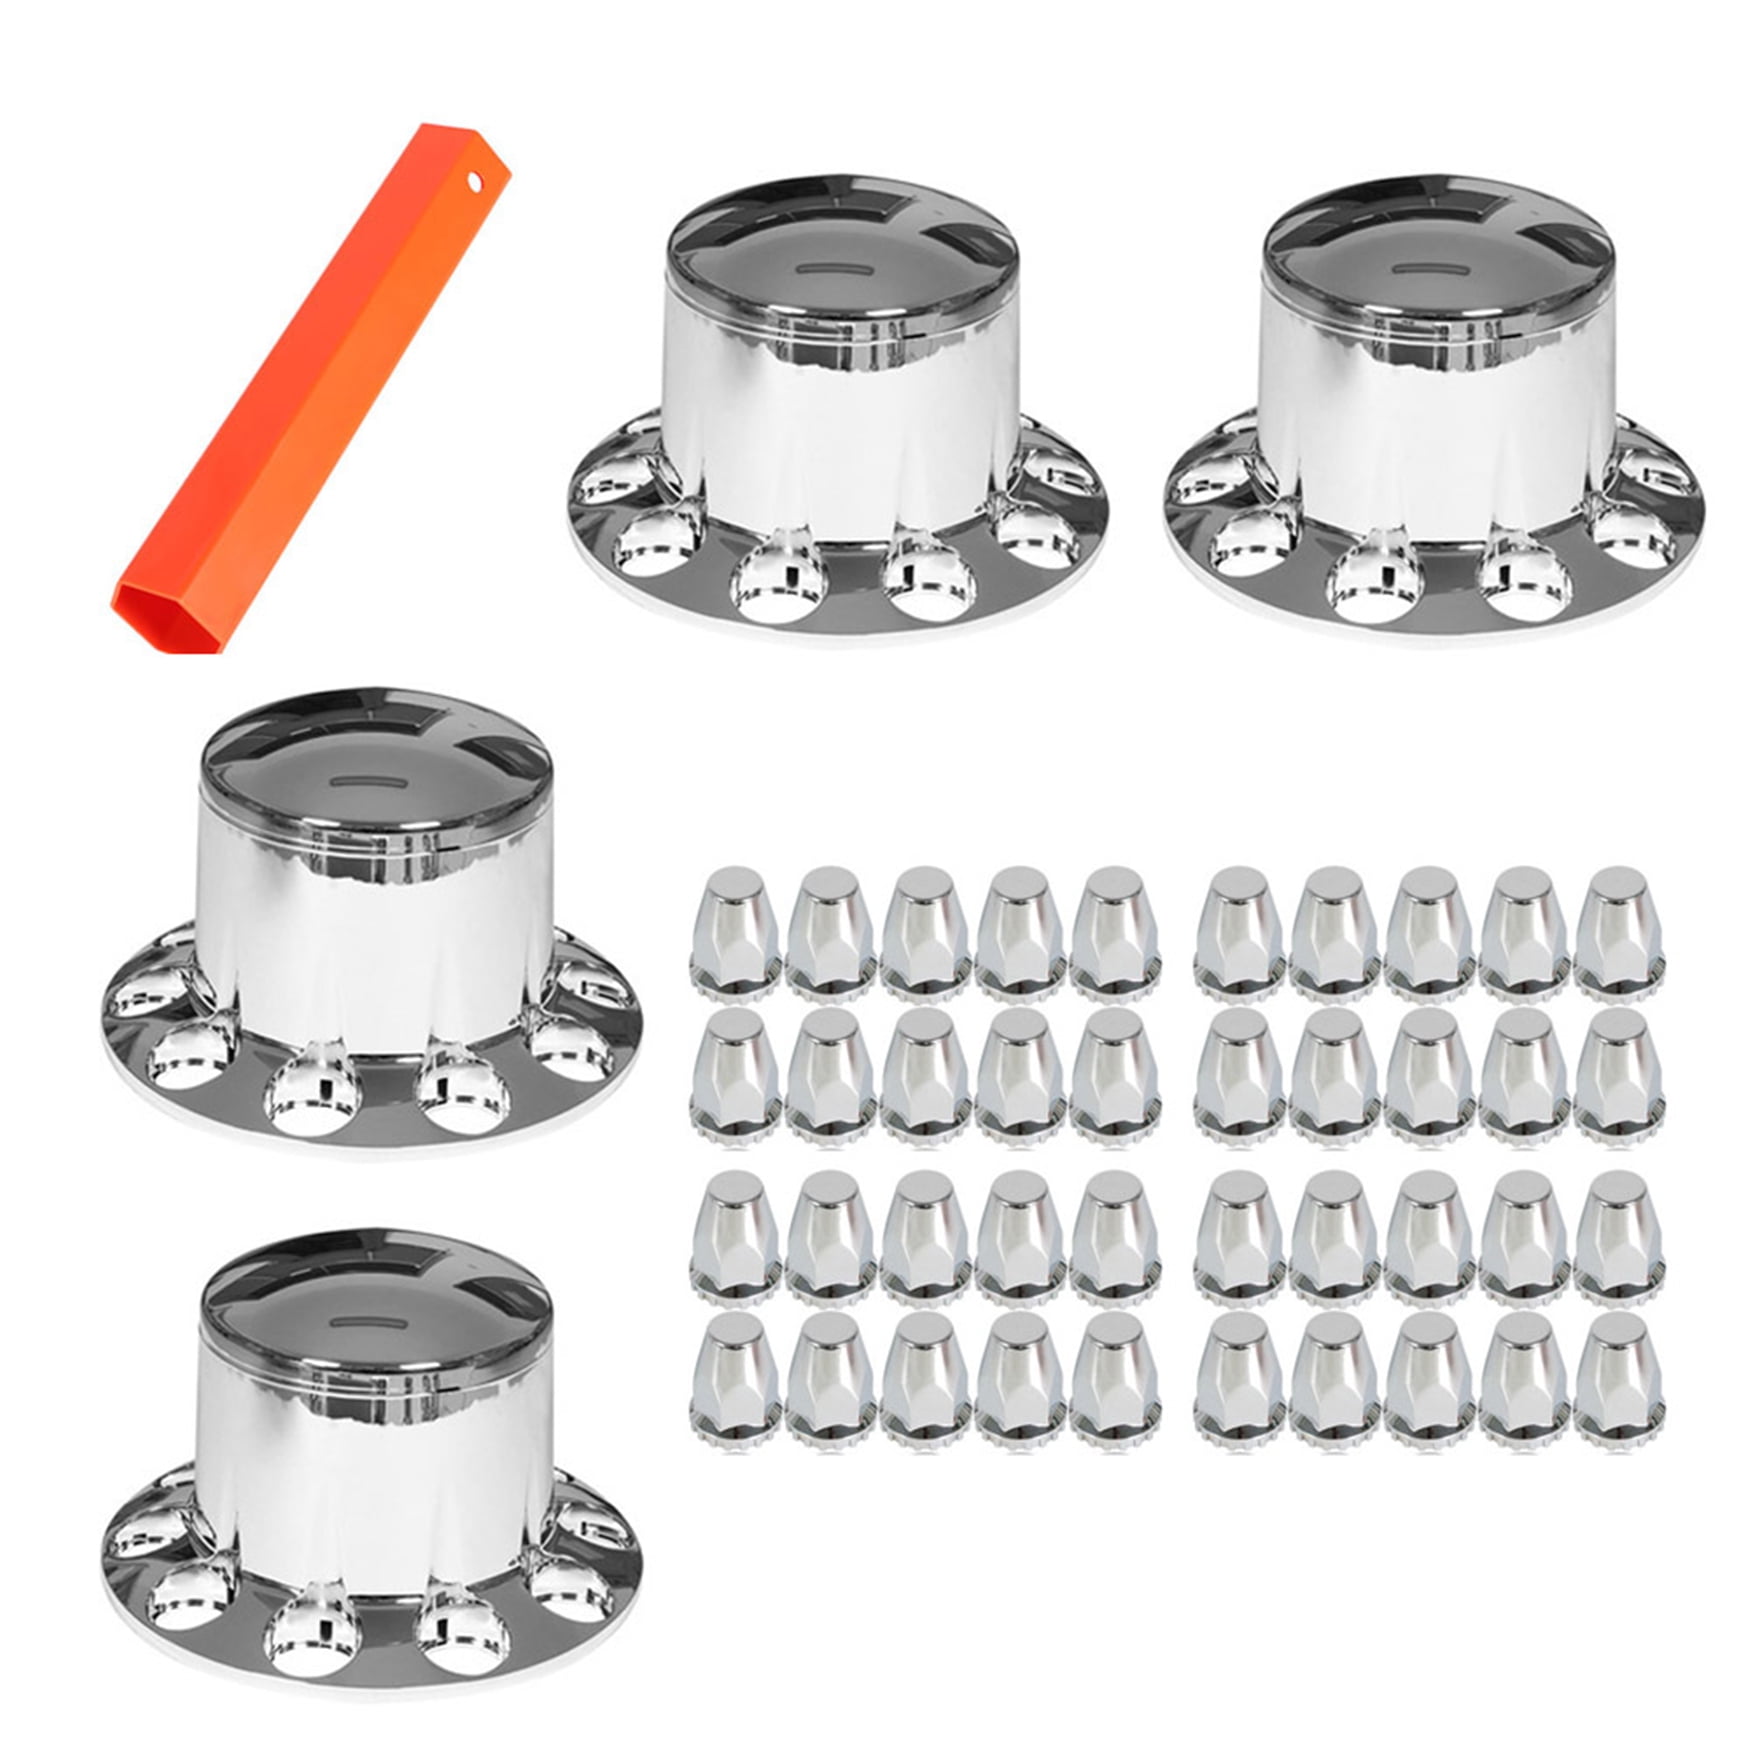 labwork Set of Chrome Front and Rear Axle Wheel Cover 33mm Screw-on Lug Nuts for 22.5 in & 24.5 in Semi Truck Wheels 